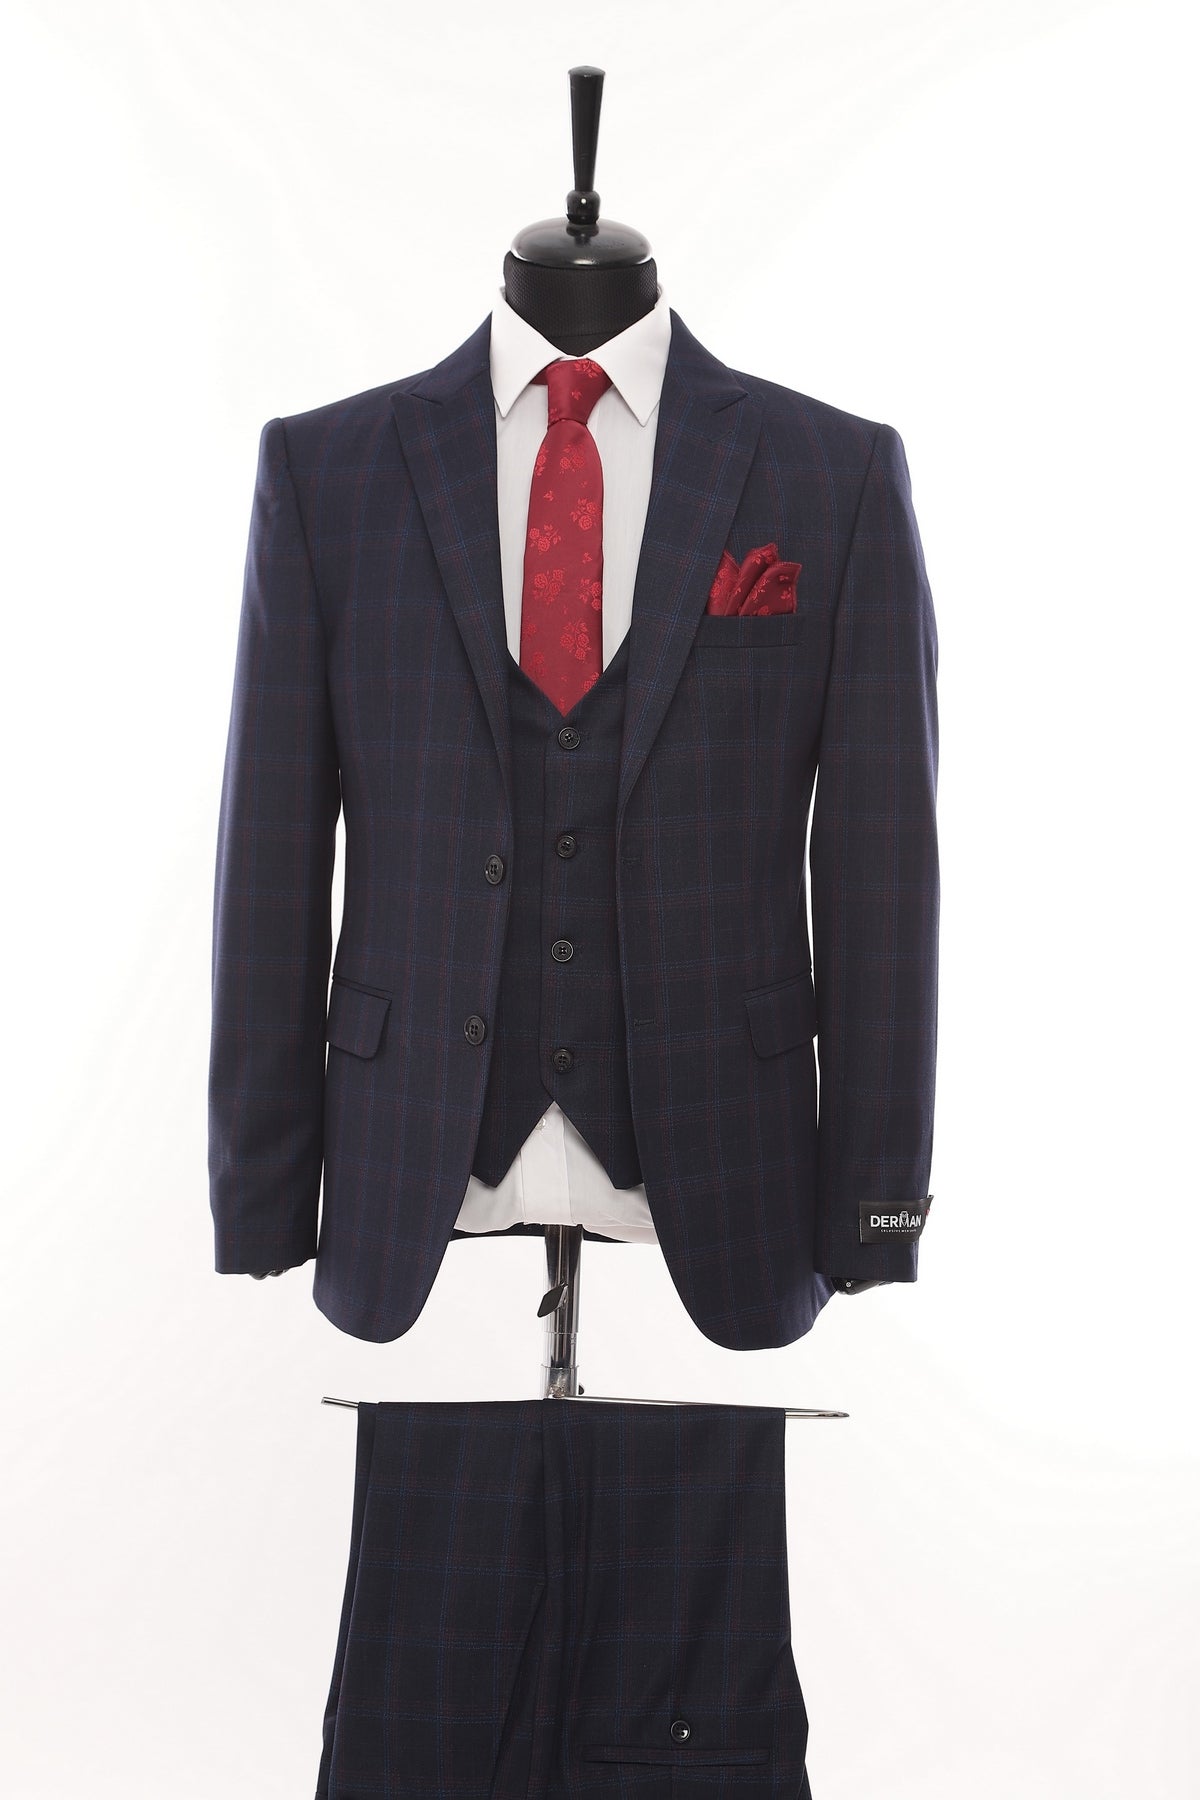 Darkblue Square Patterned Fabric 3 Piece Suit